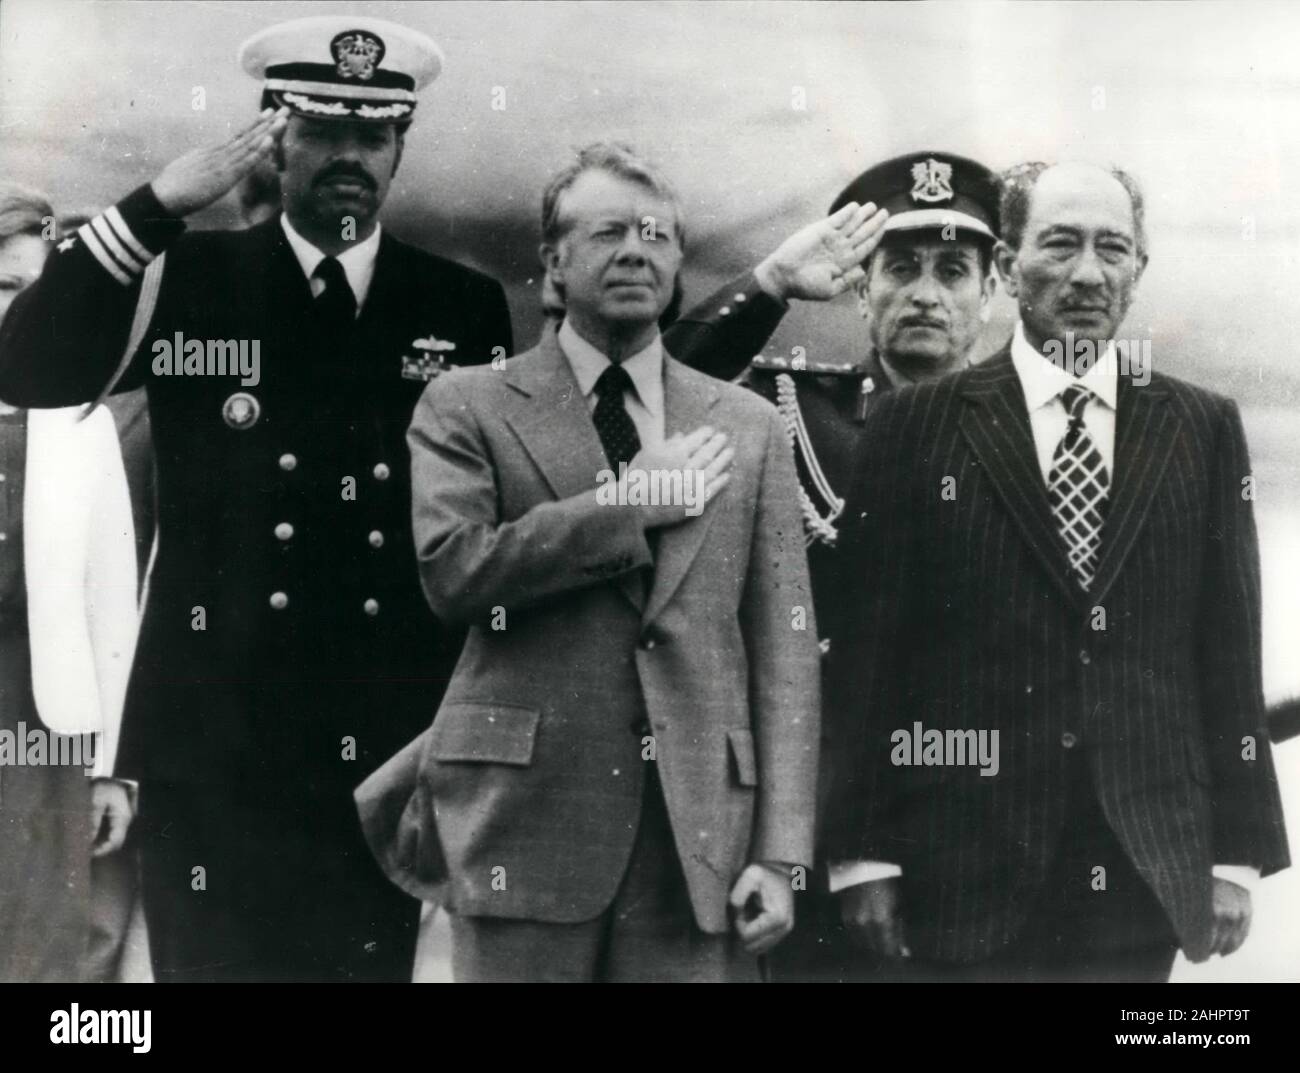 President JIMMY CARTER, center, holds his hand over his heart as he arrives in Egypt for peace talks. 8th Mar, 1979. President Carter and Egyptian President ANWAR SADAT are at the airport after Carter arrived in Cairo to meet with President Sadat and address the People's Assembly. Credit: Keystone Pictures USA/ZUMAPRESS.com/Alamy Live News Stock Photo